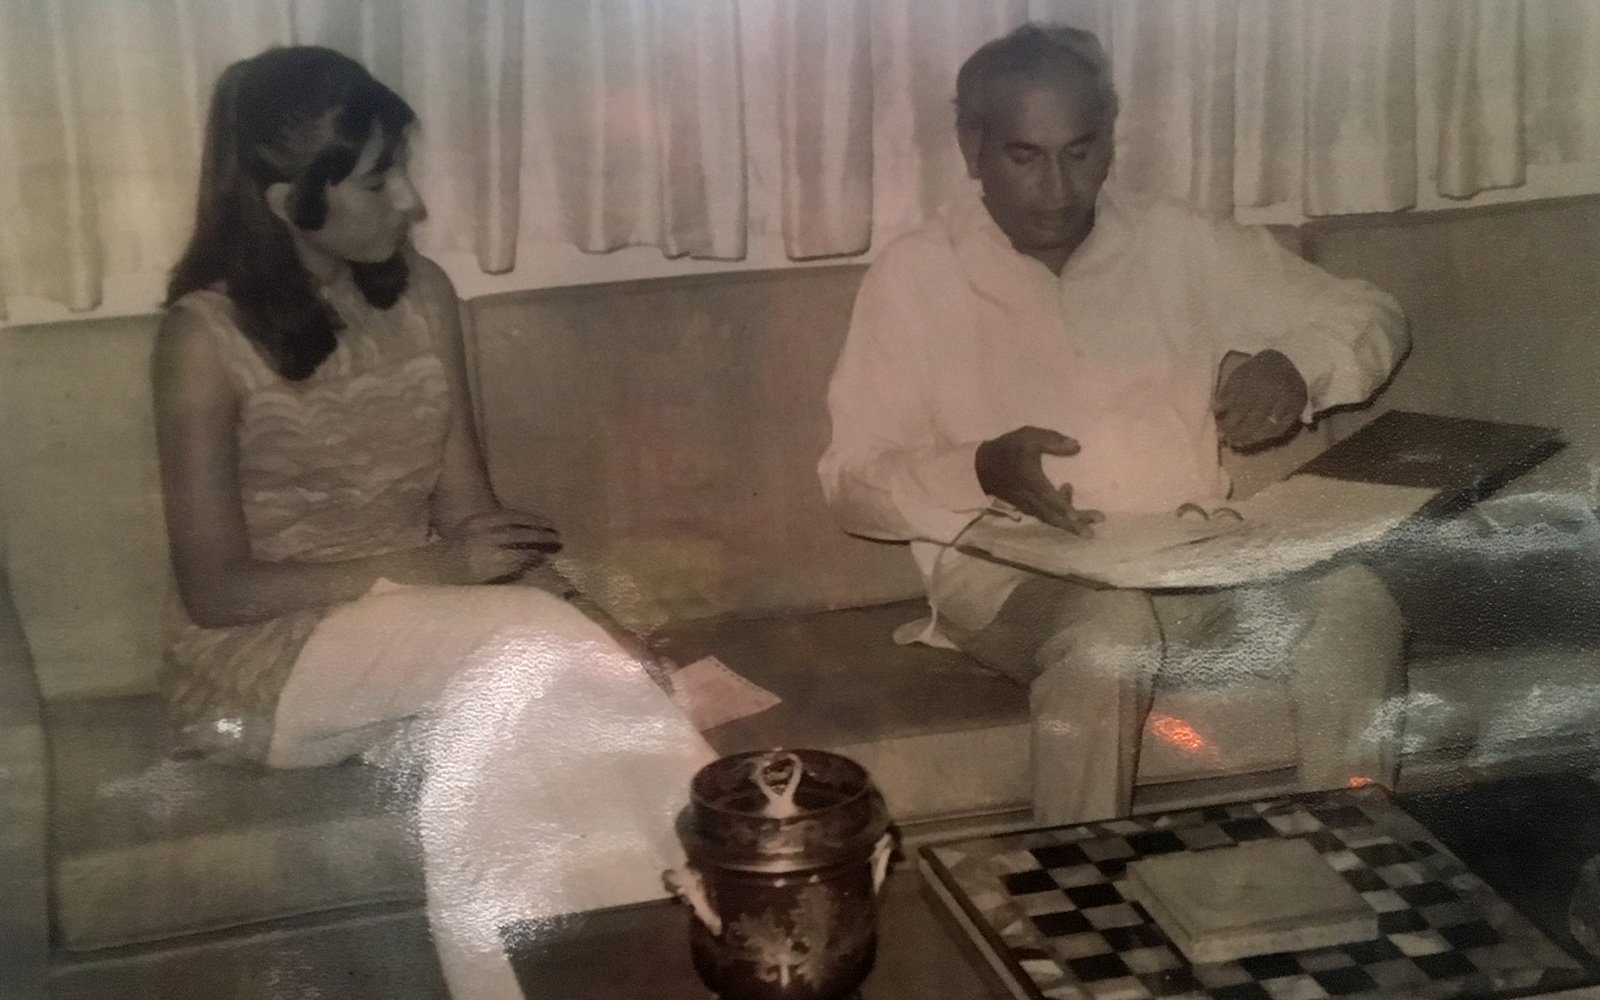 Benazir Bhutto pictured here with her father, Zulfikar Ali Bhutto.—Photo by Agha Feroze